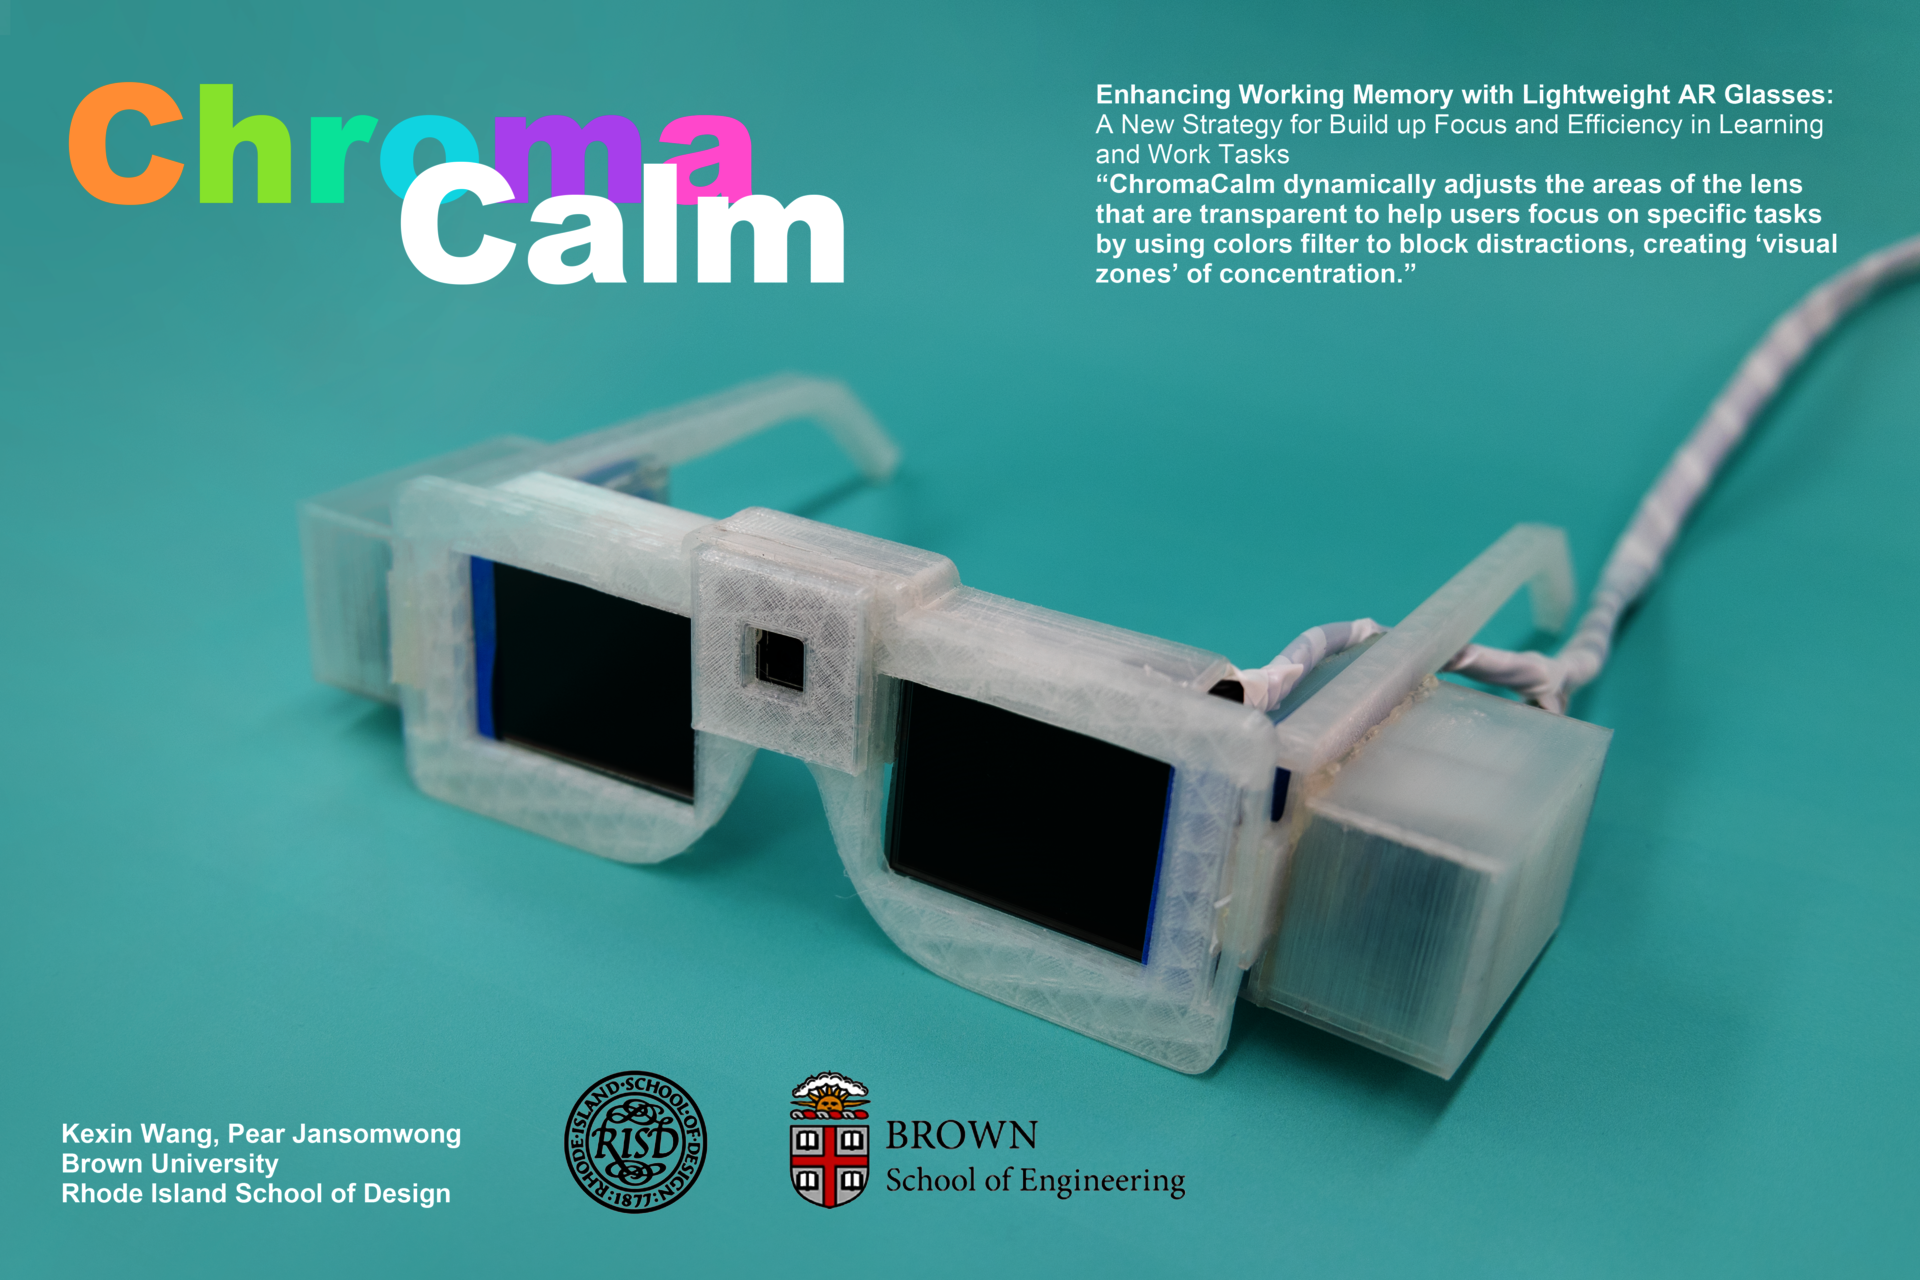 ChromaCalm AR glasses with translucent frames and tinted lenses, showcasing innovative design for enhancing concentration by controlling visual stimuli.